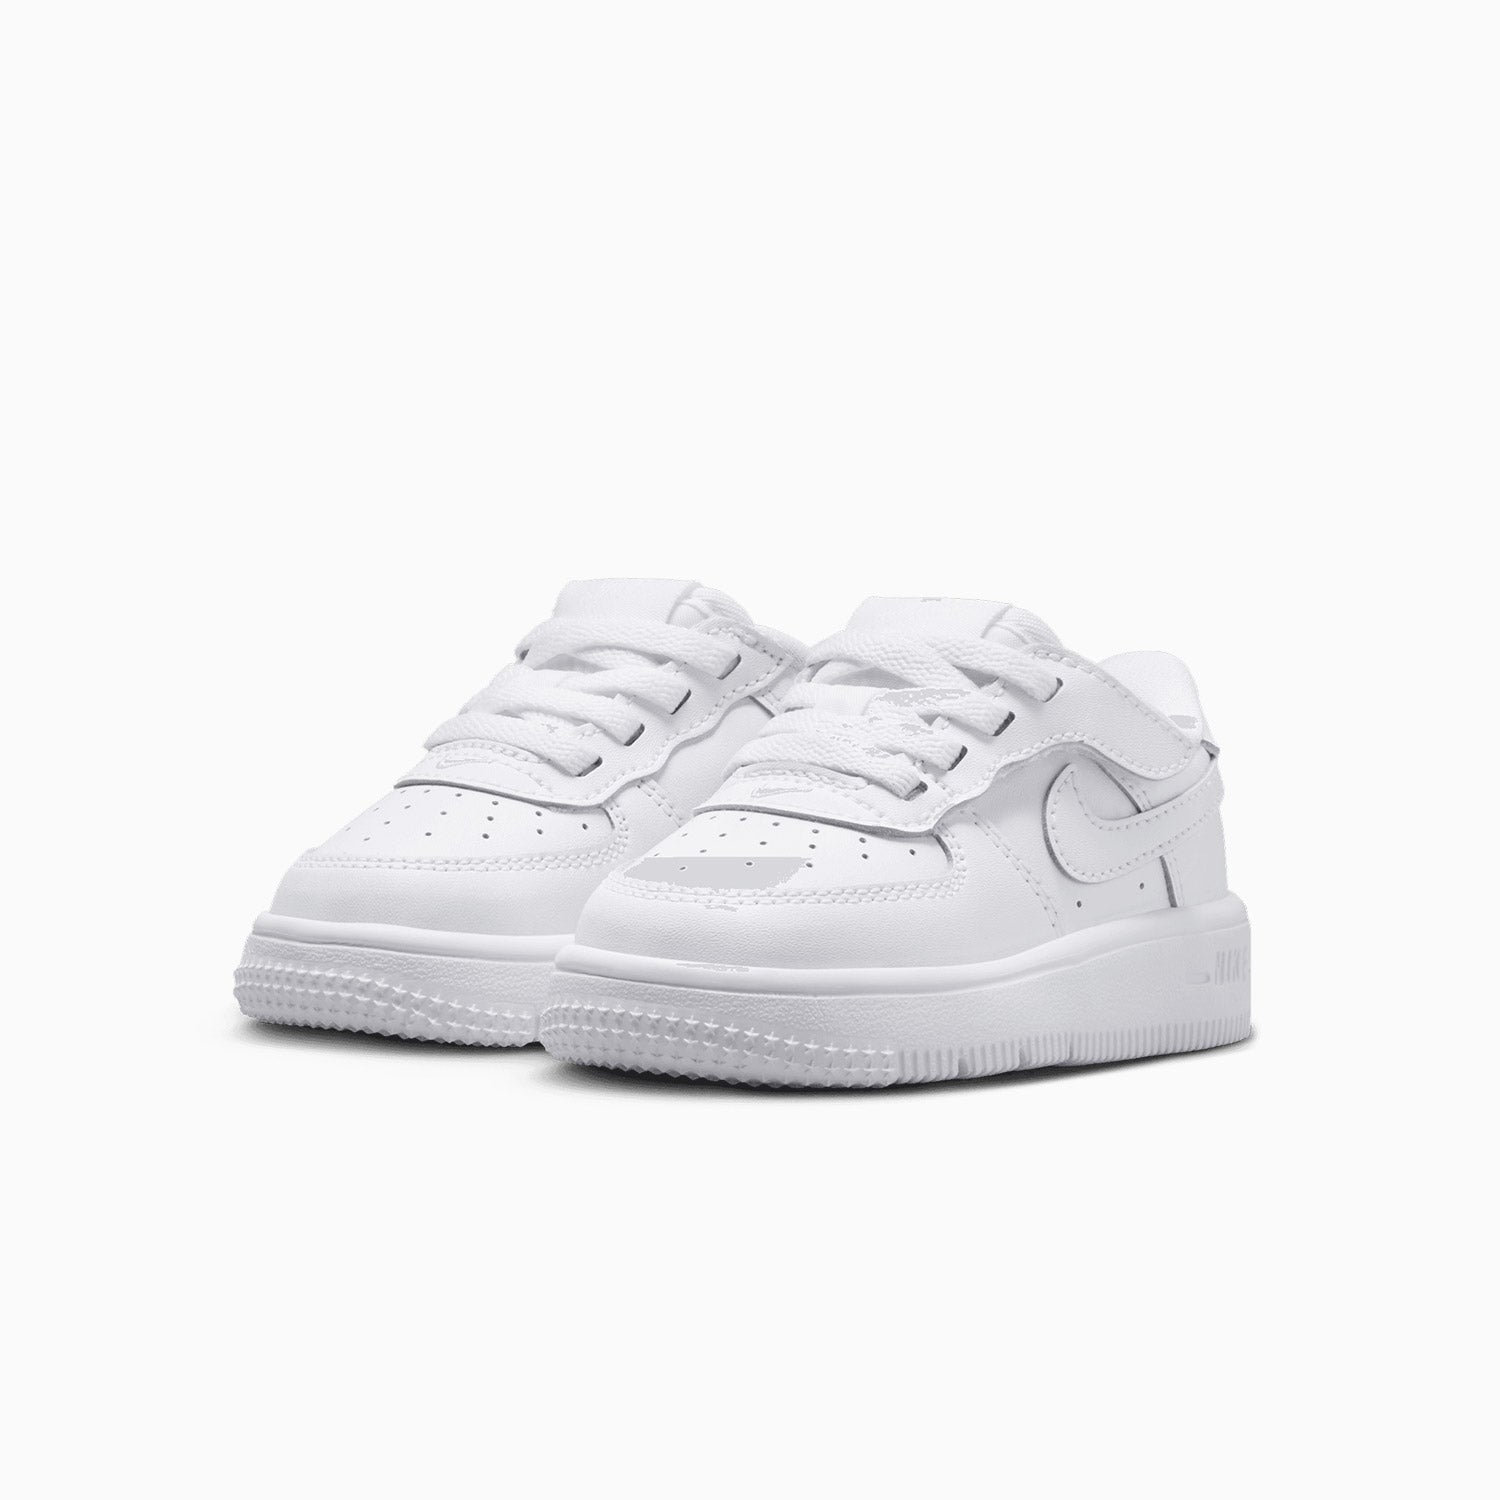 nike-kids-air-force-1-low-easyon-toddlers-shoes-fn0236-111